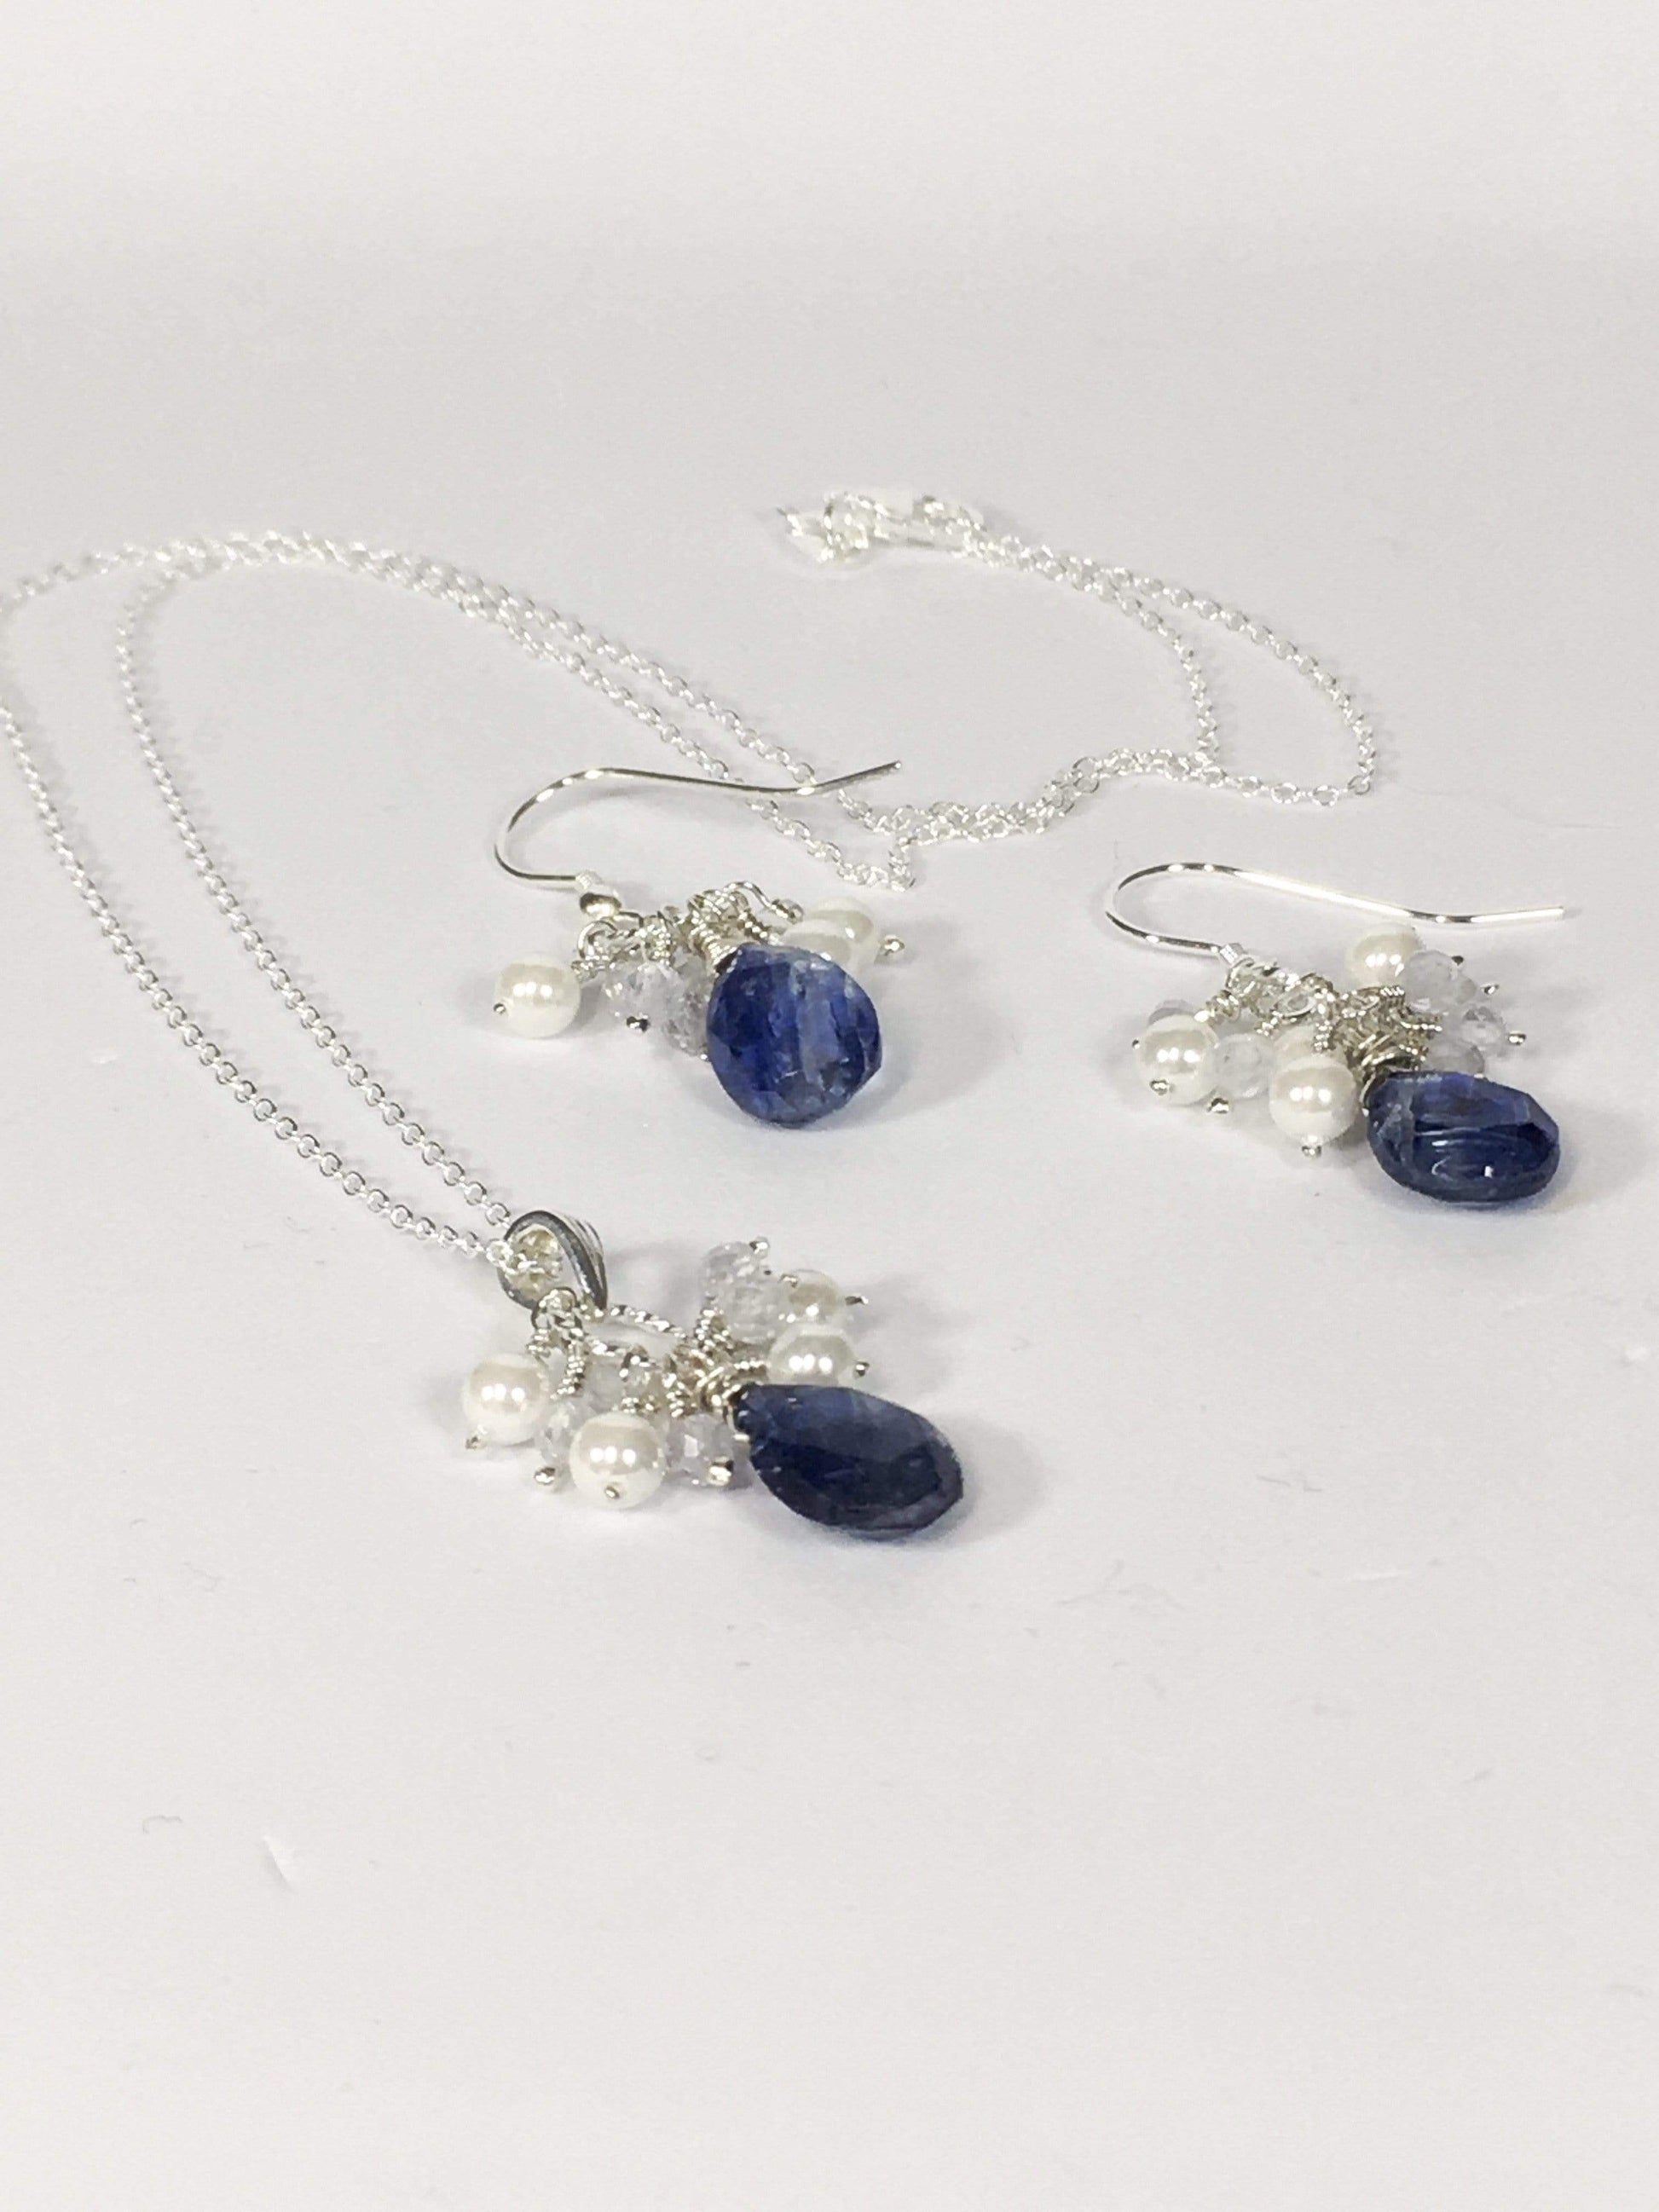 Necklace Kyanite And Zircon Cluster Necklace Set Jewelz Galore Kyanite And Zircon Cluster Necklace Set | Jewelz Galore | Jewellery